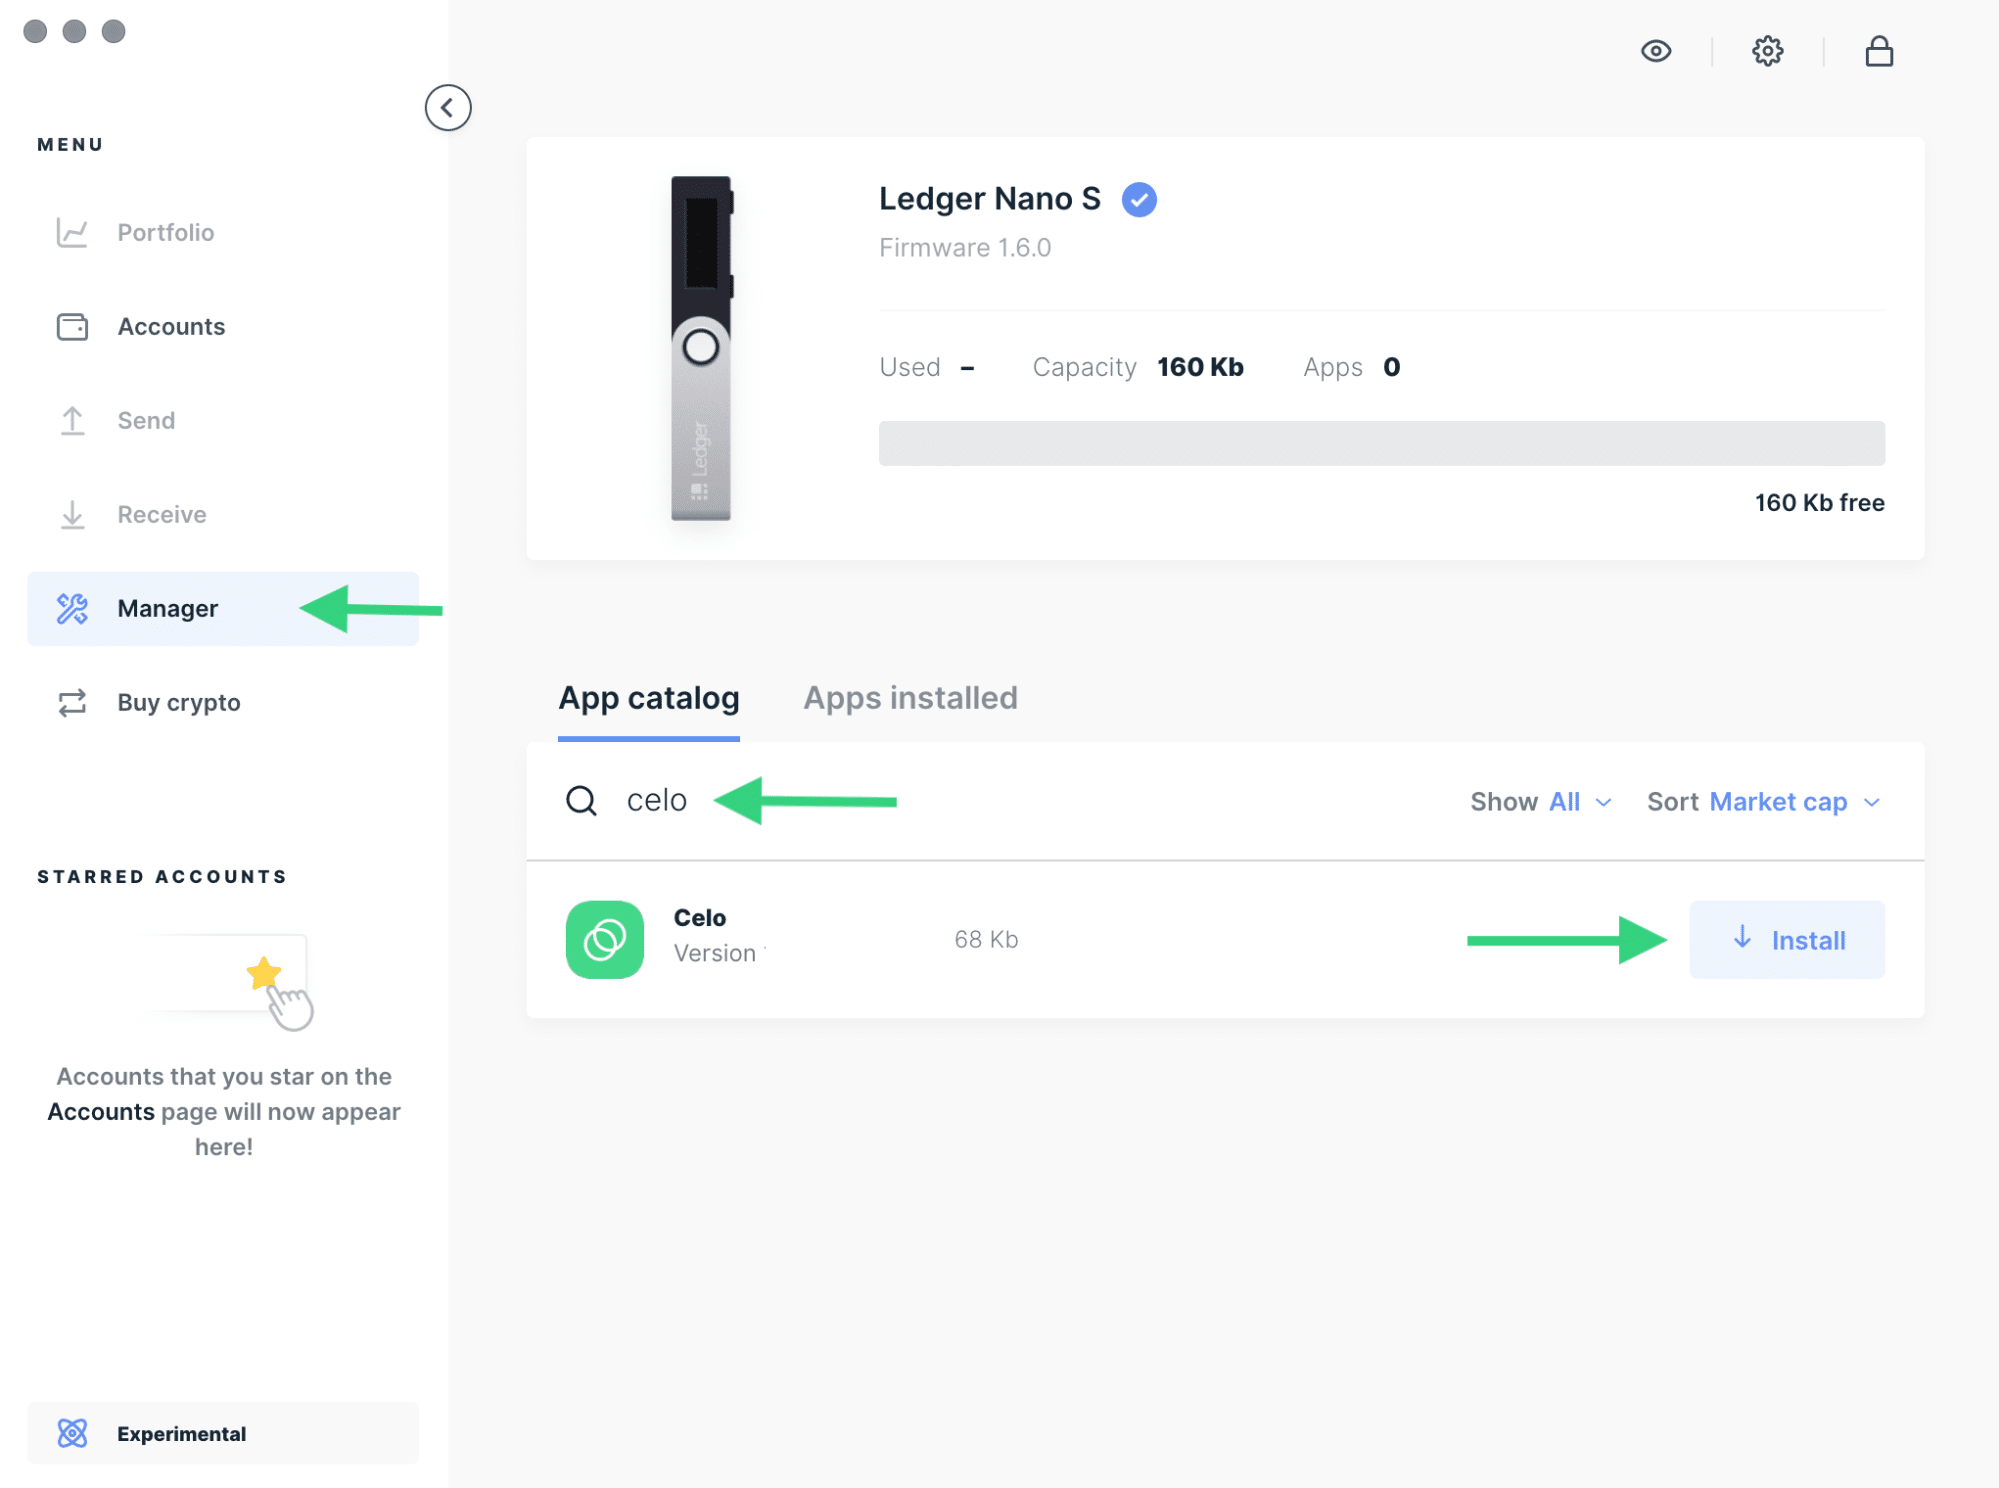 How to use the Ledger wallet, screen